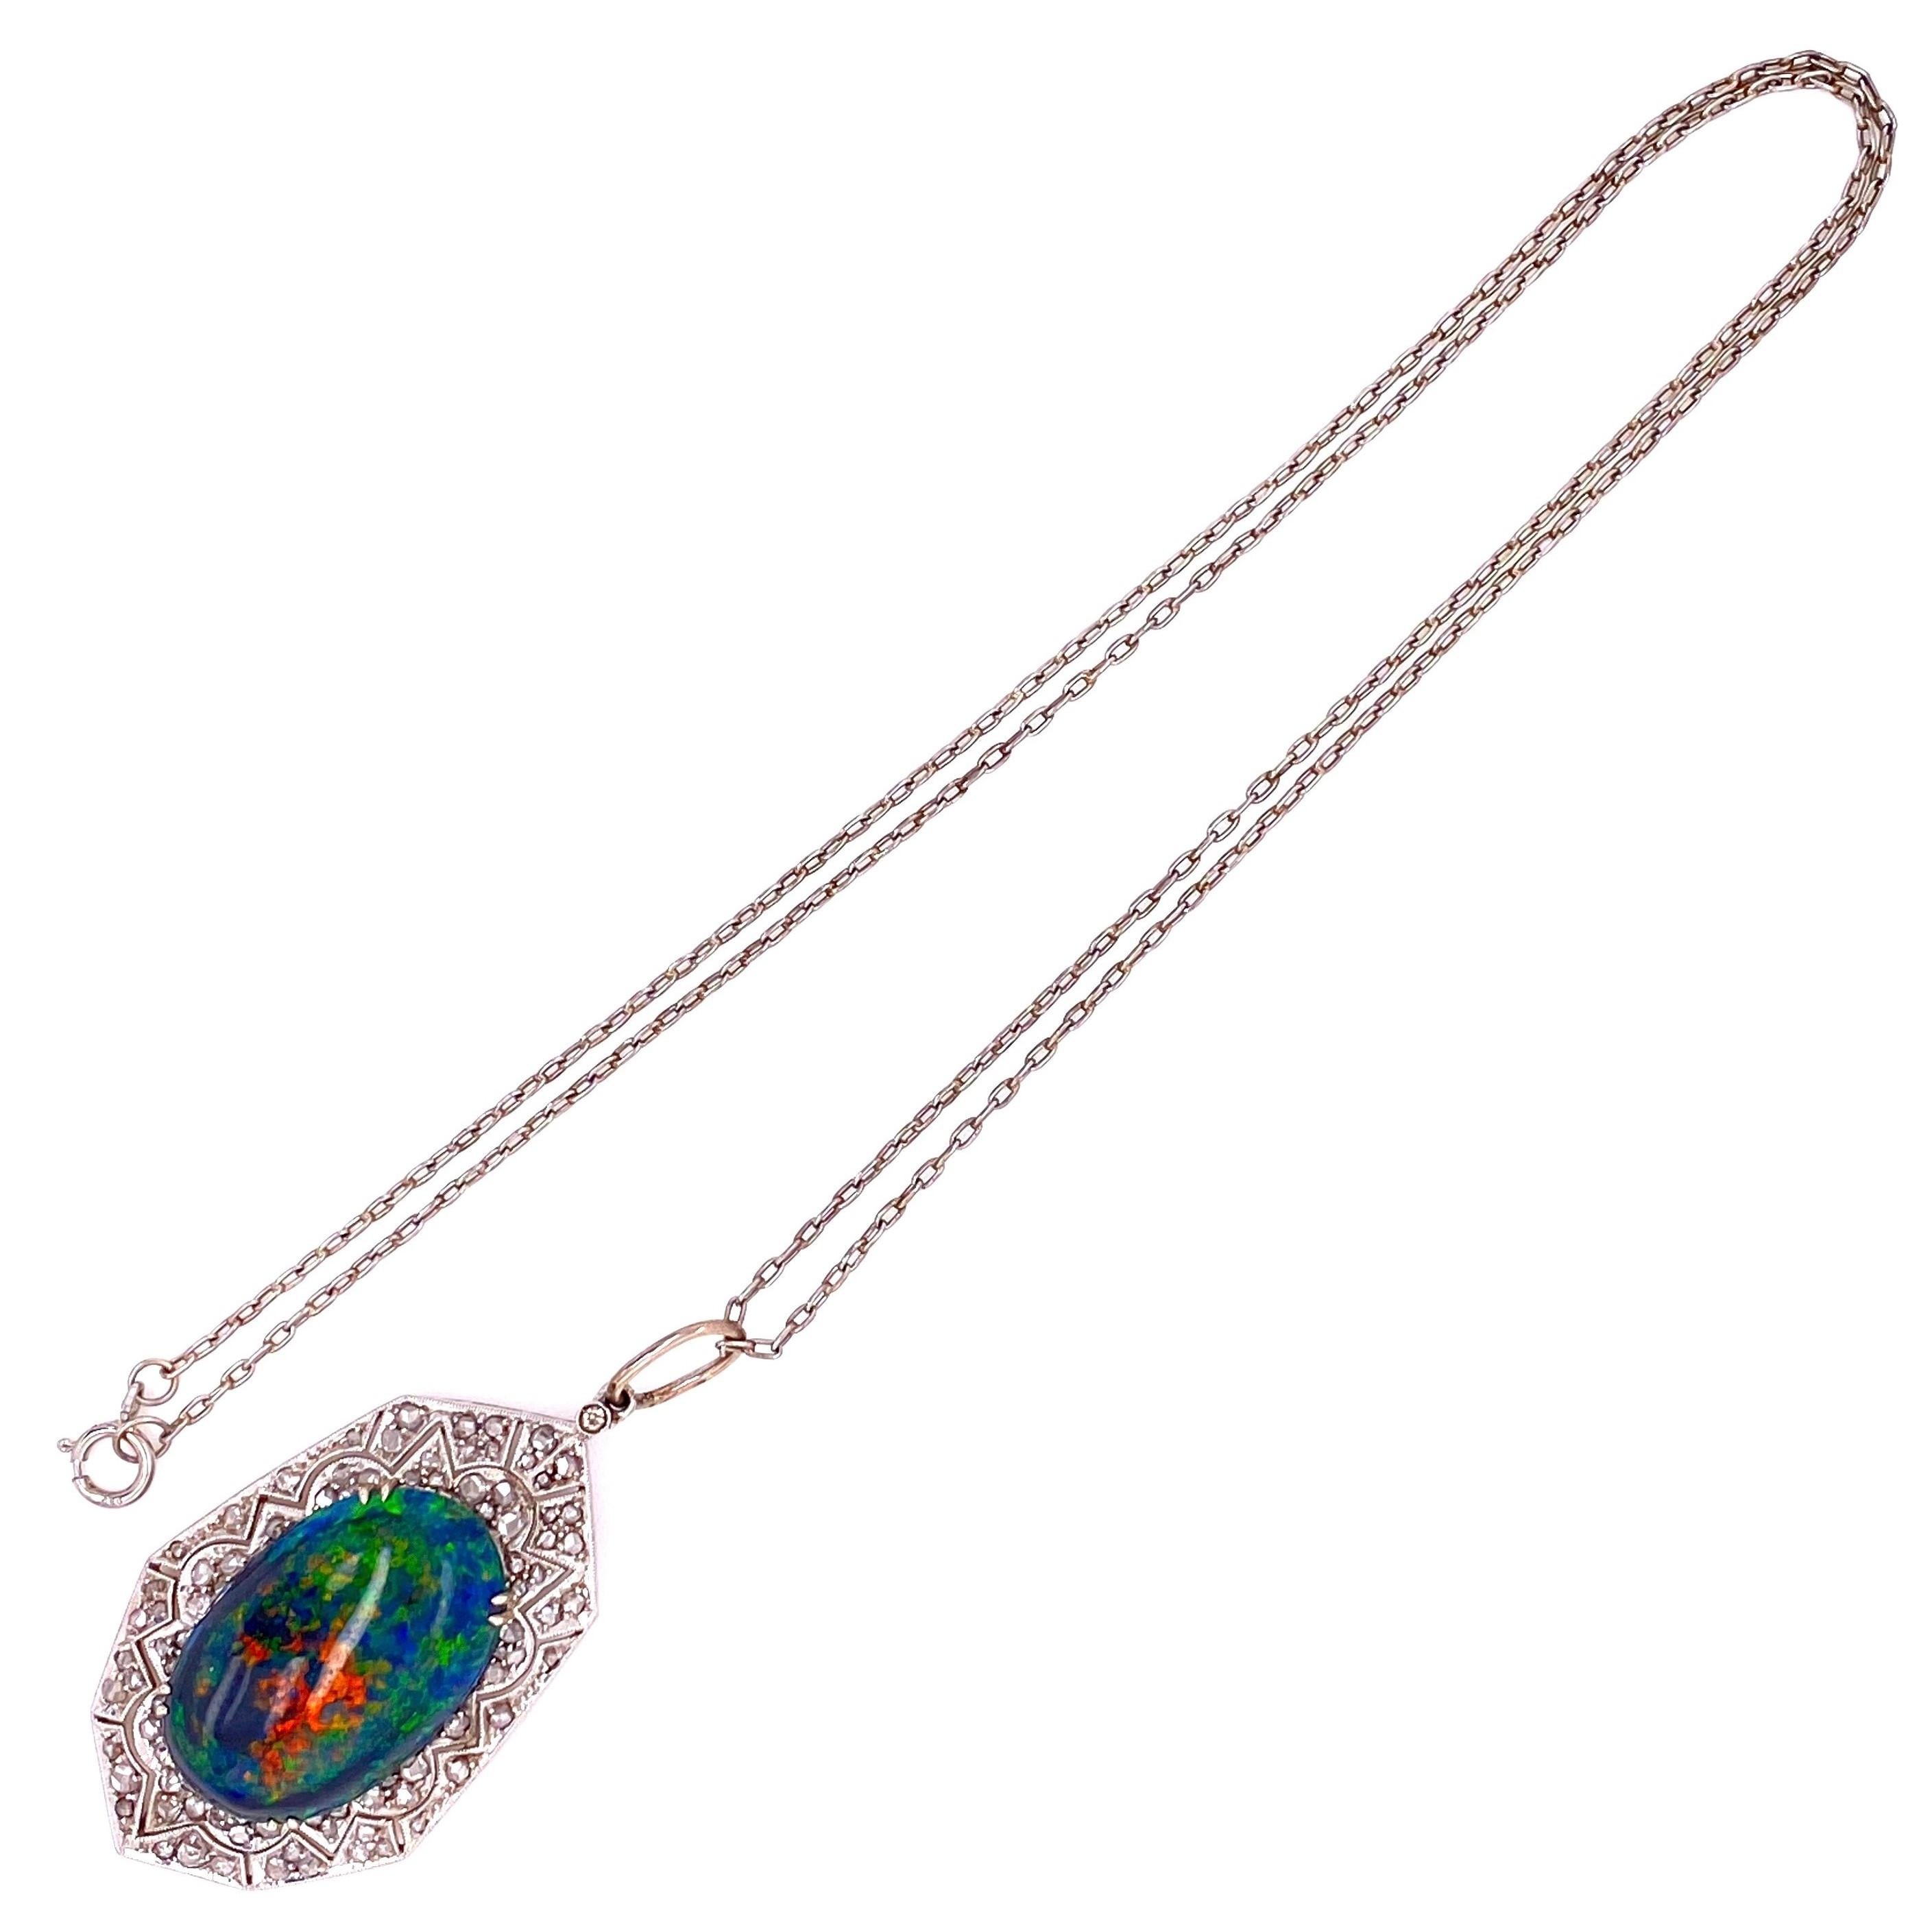 Simply Beautiful! Elegant and finely detailed Platinum Pendant Necklace set with a securely nestled 9.28 Carat Black Opal and surrounded by Brilliant-cut Diamonds, weighing approx. 0.90 total Carat weight. Hand crafted in Platinum, the Pendant